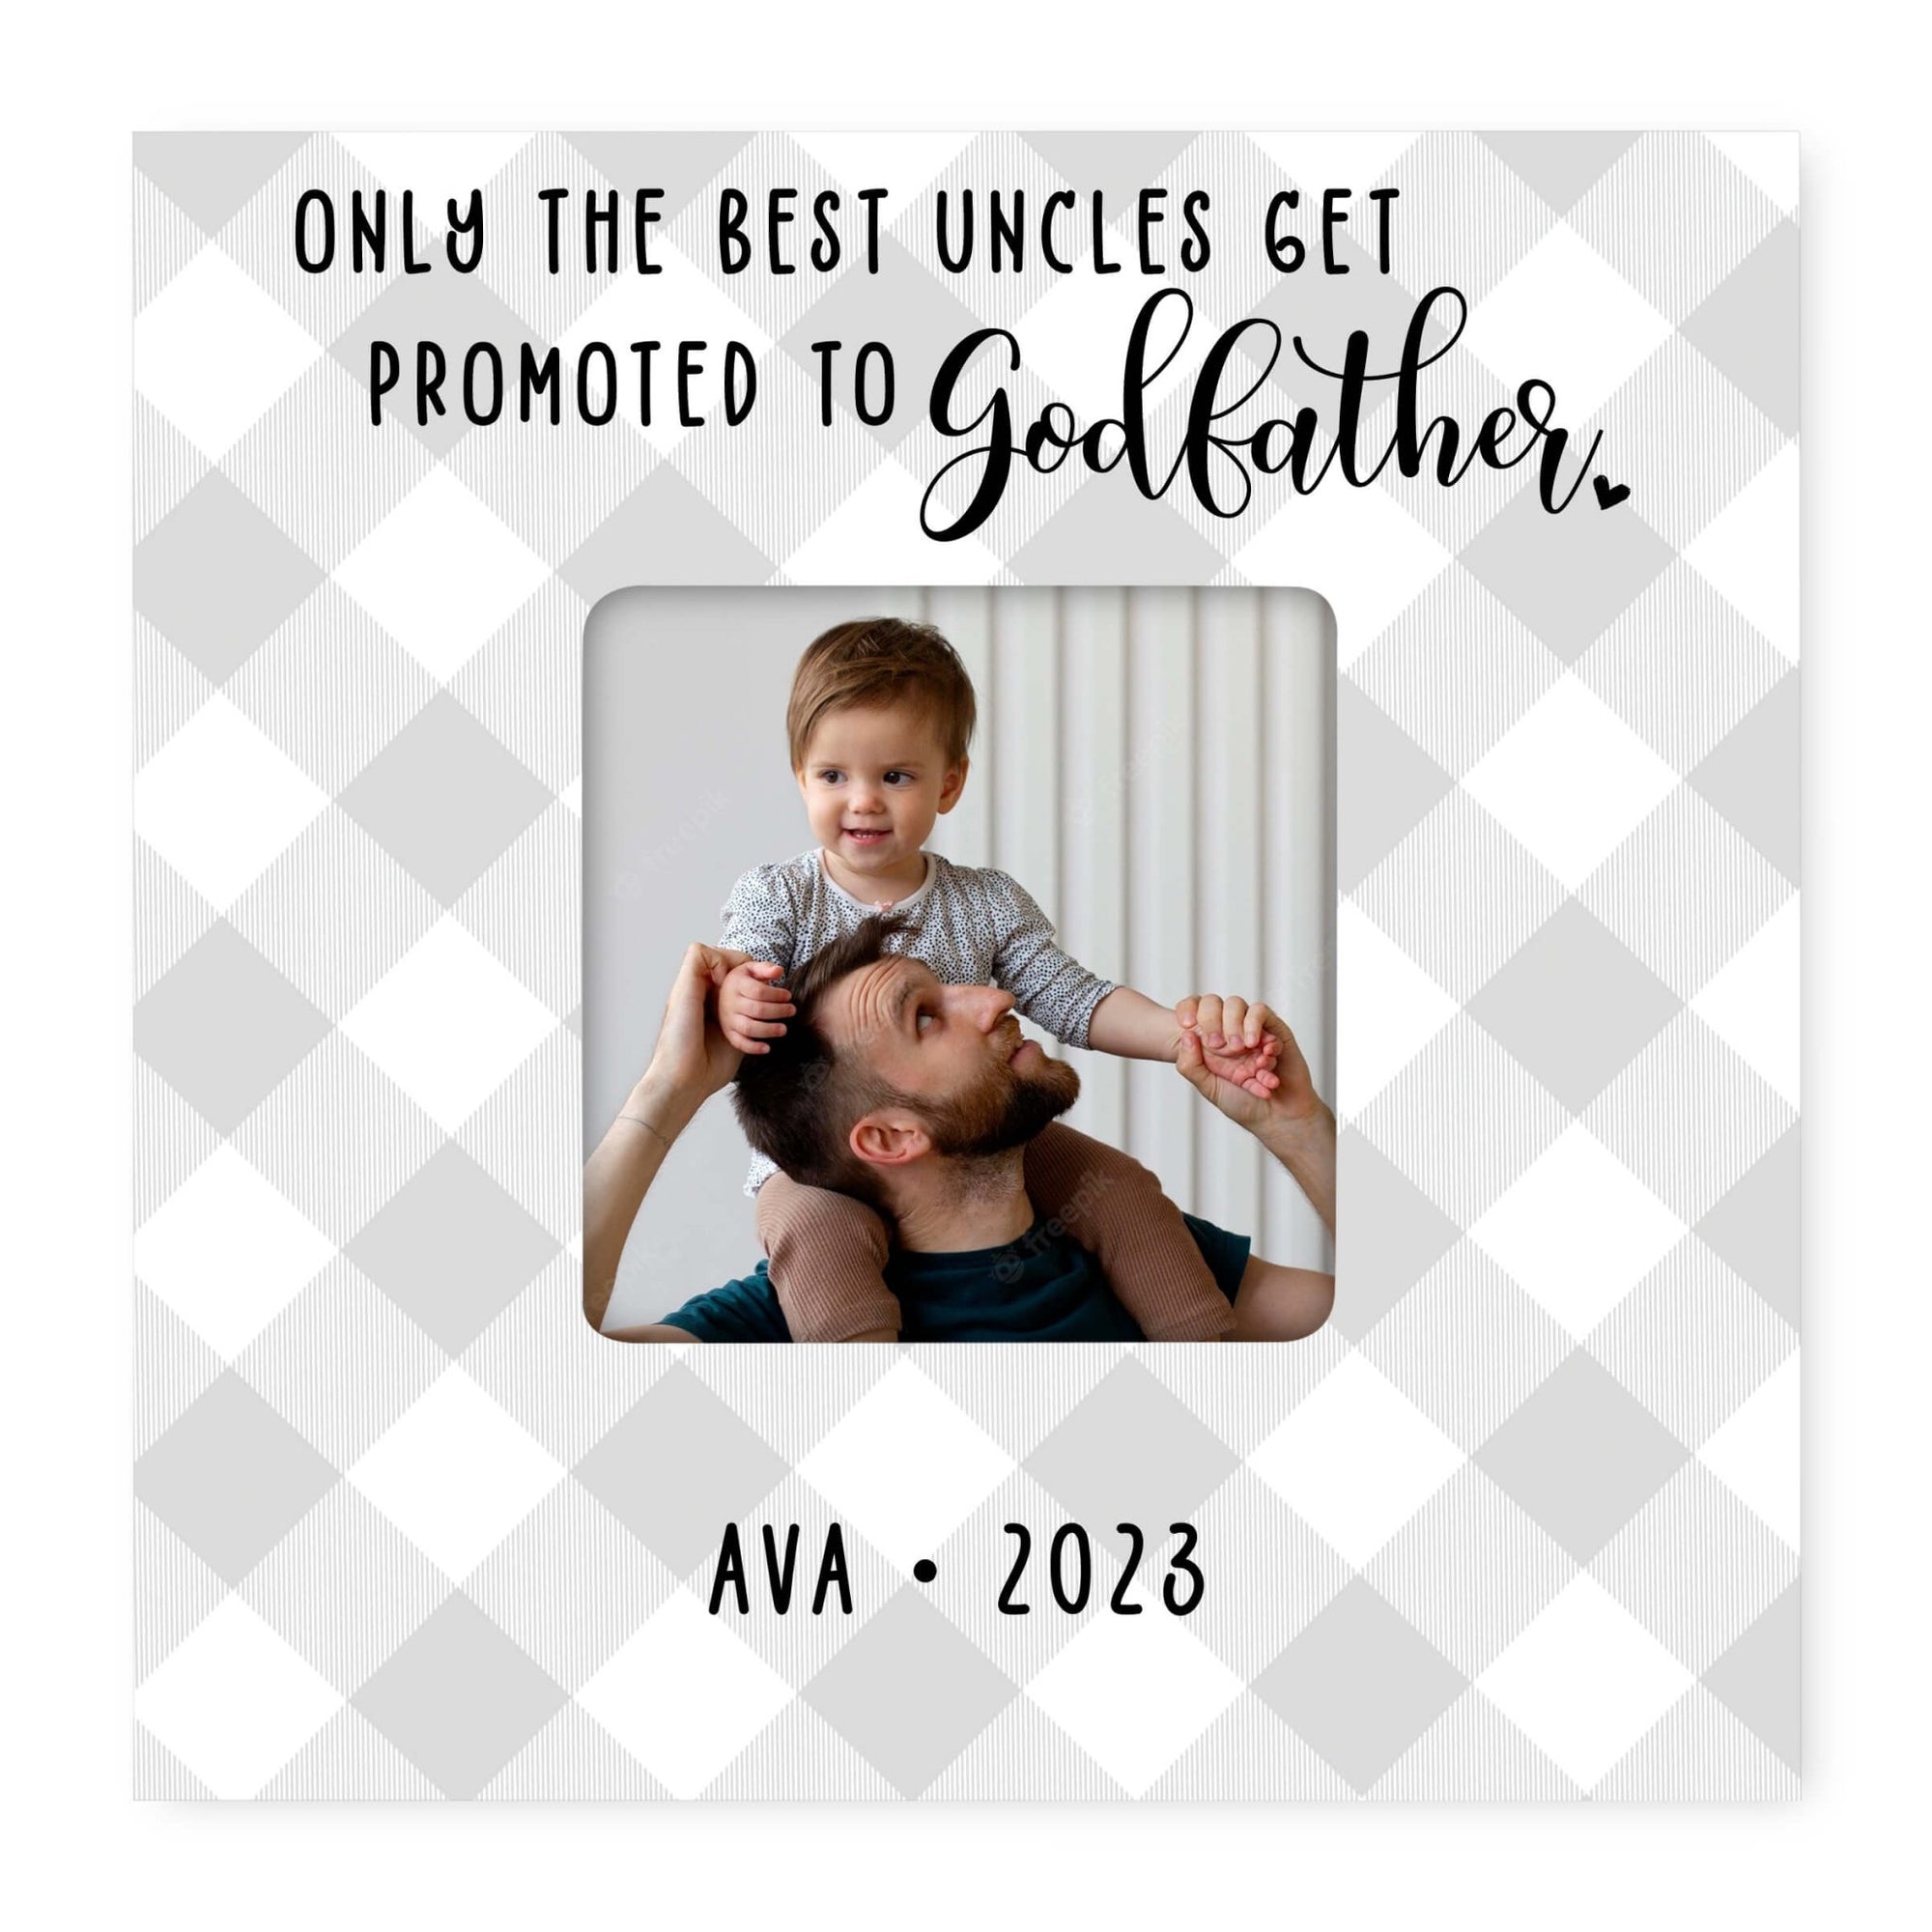 Personalized Wooden Picture Frame for Godfather - LifeSong Milestones